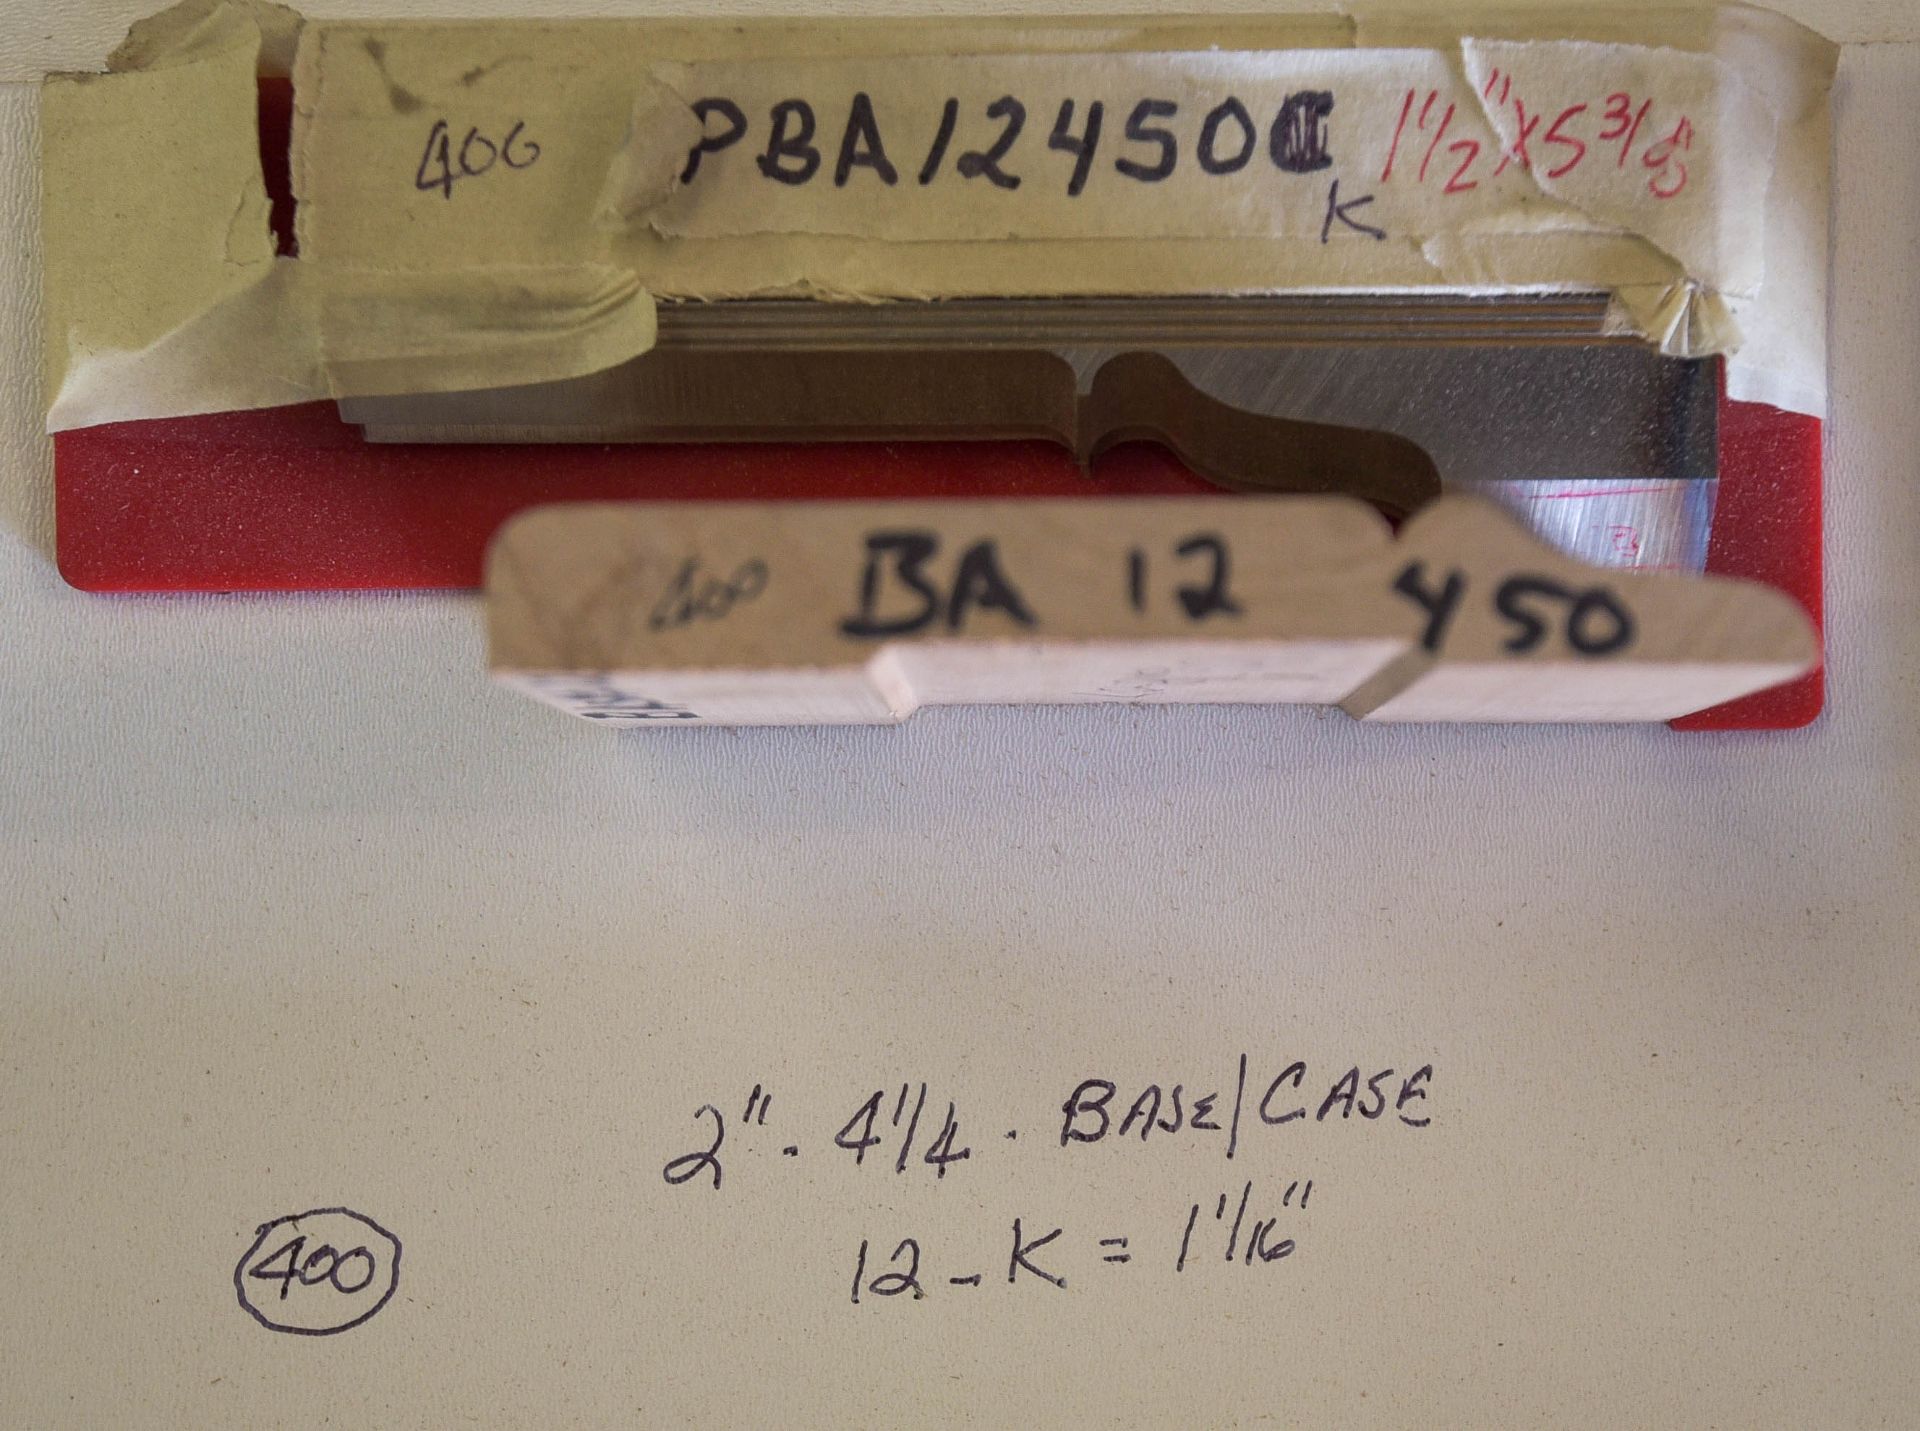 Moulding Knives, 2" - 4-1/4" Base/Case, 12 - K = 1-1/16", Knives are in Good Condition and Ready t